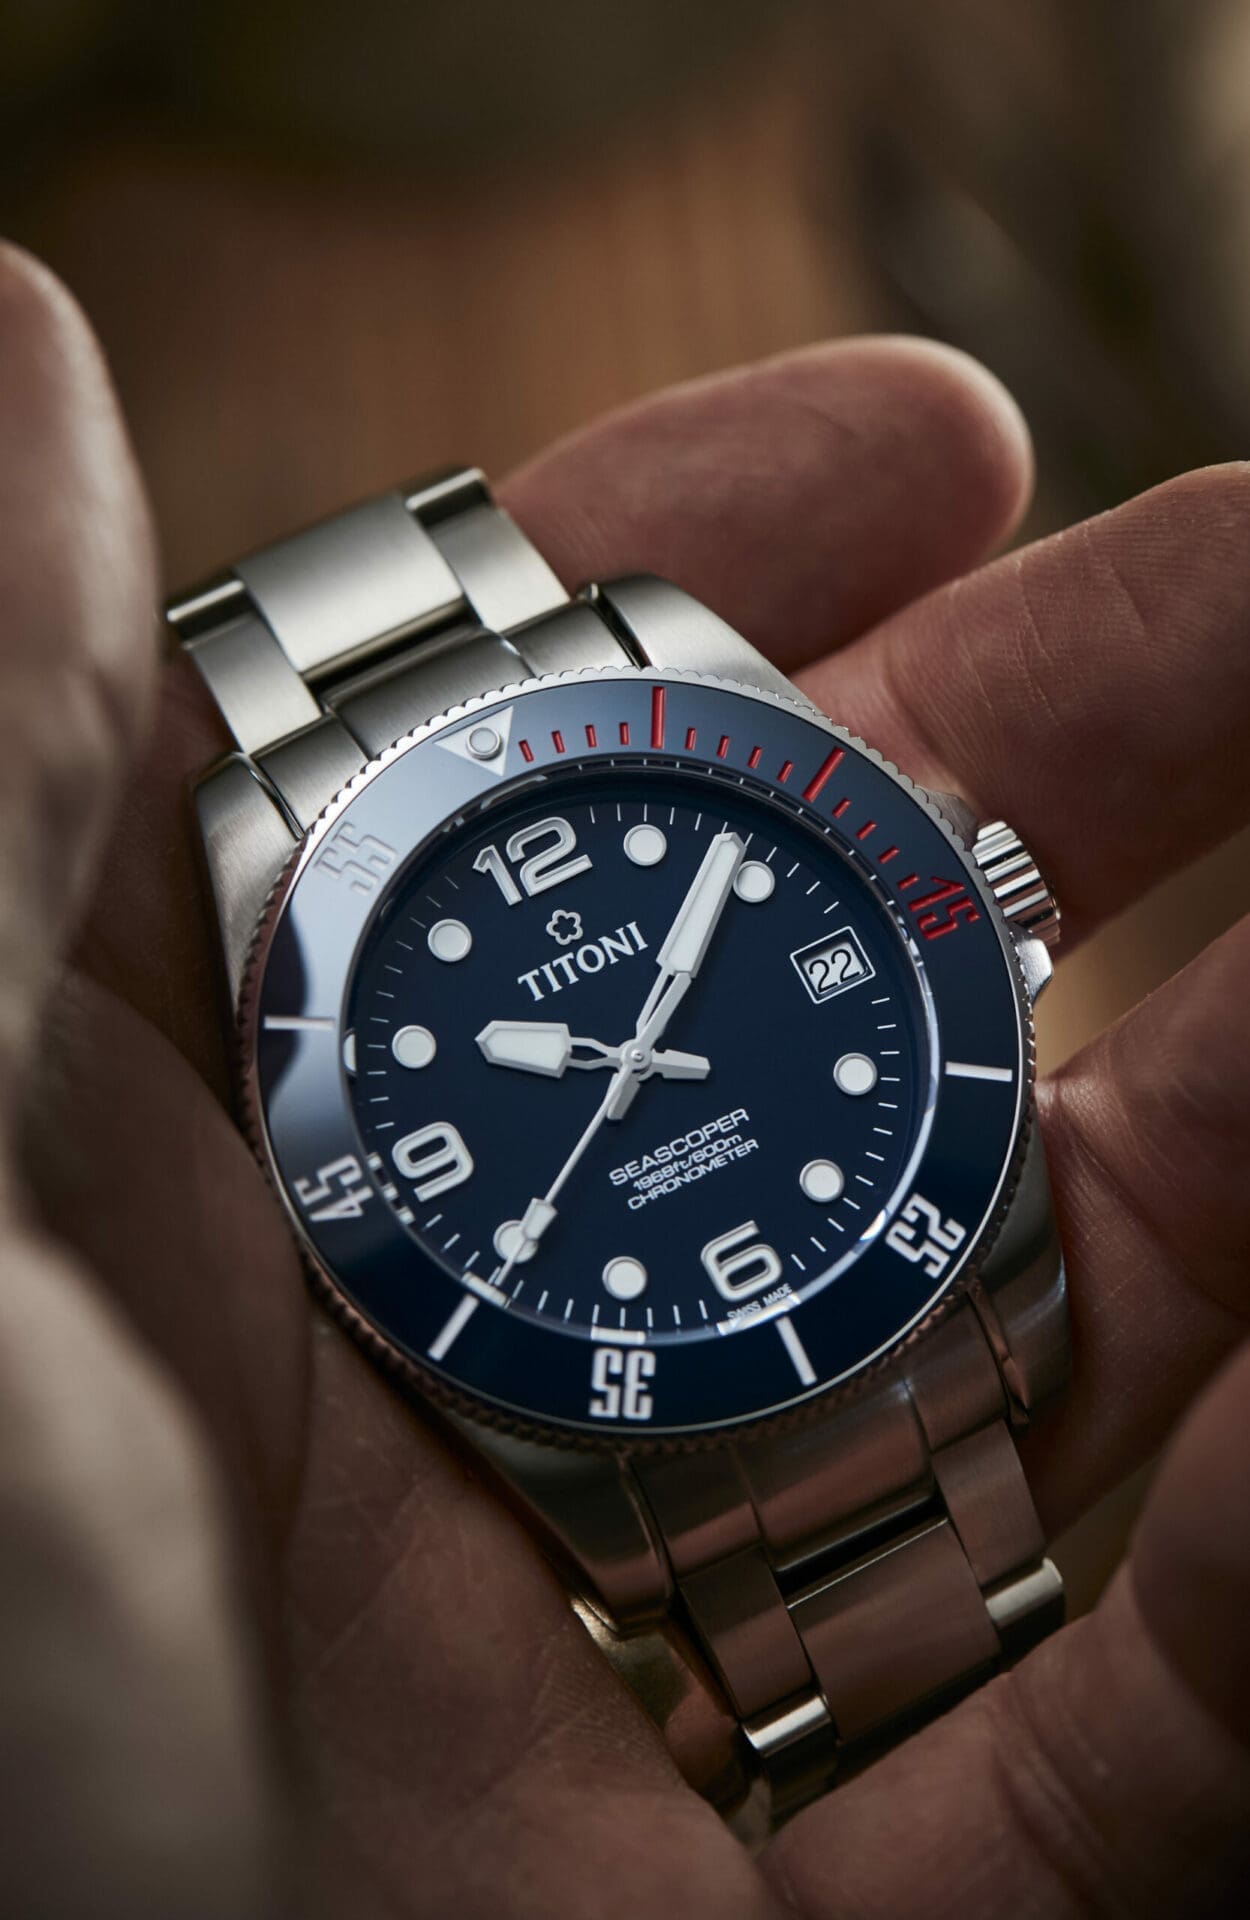 HANDS-ON: The Titoni Seascoper range delivers classic dive watches with a clean-cut, modern look